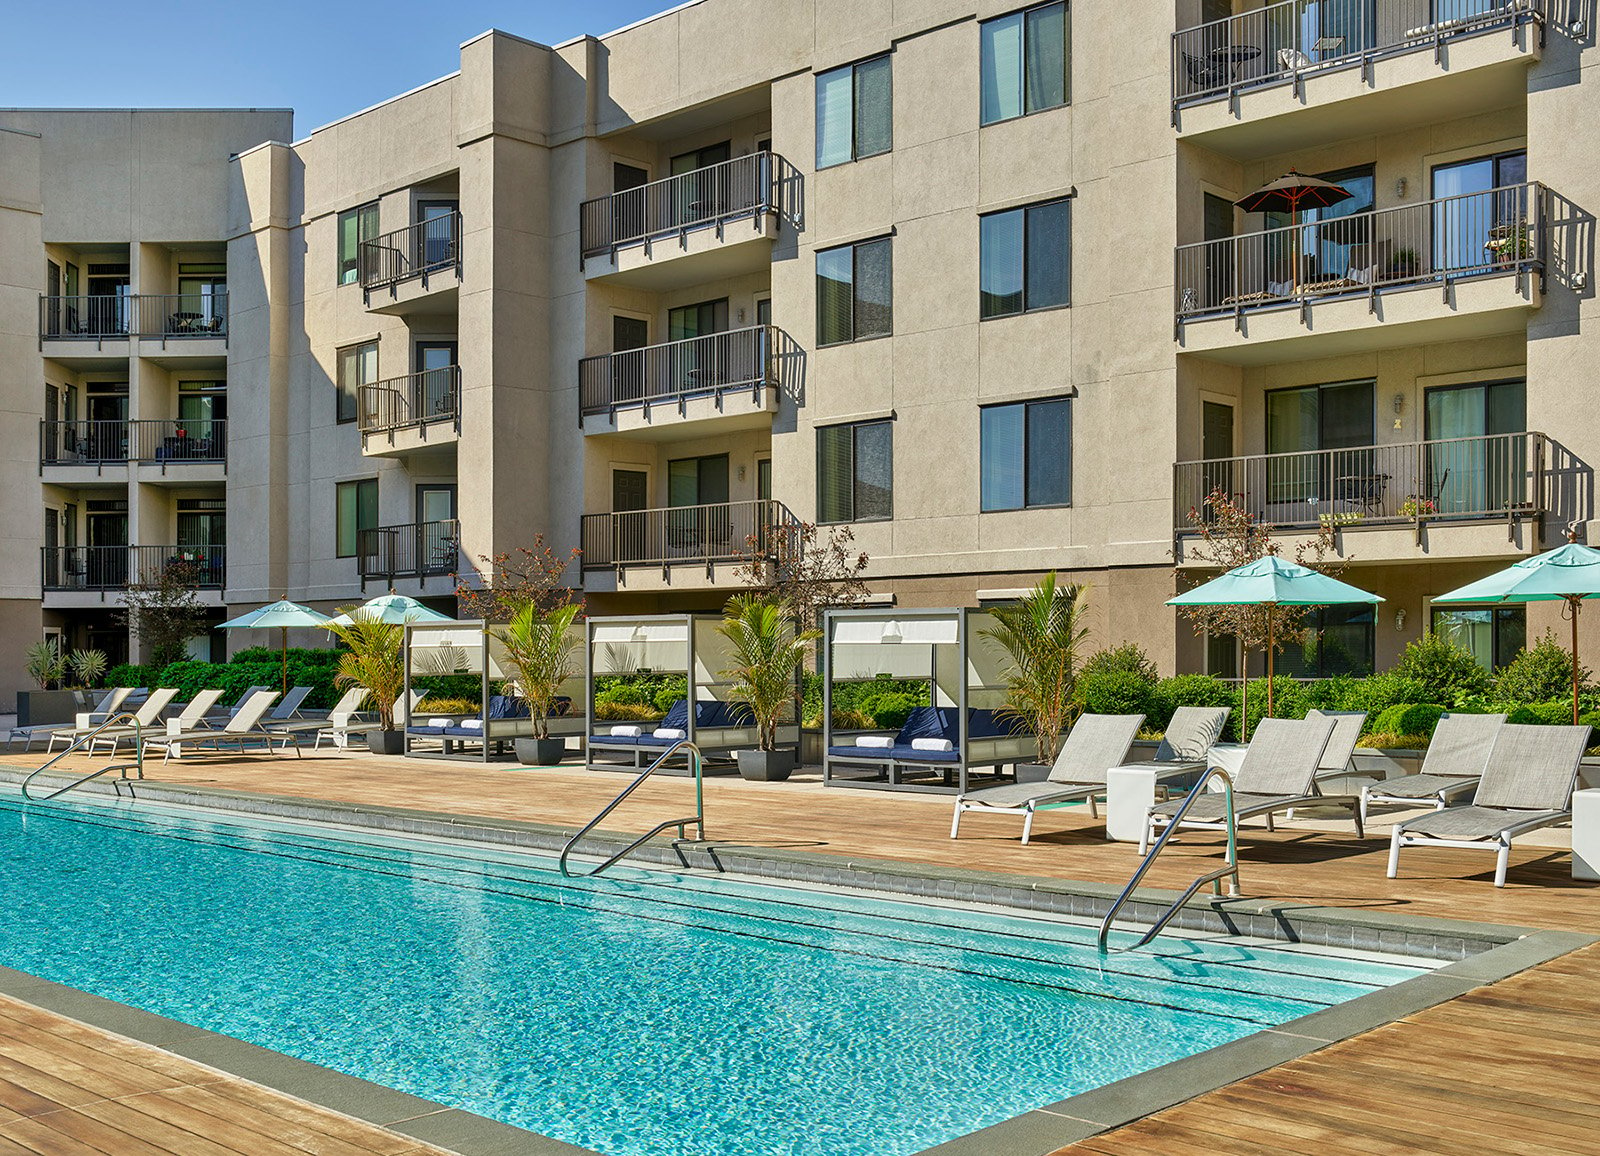 Pool in an outdoor courtyard with apartment building behind